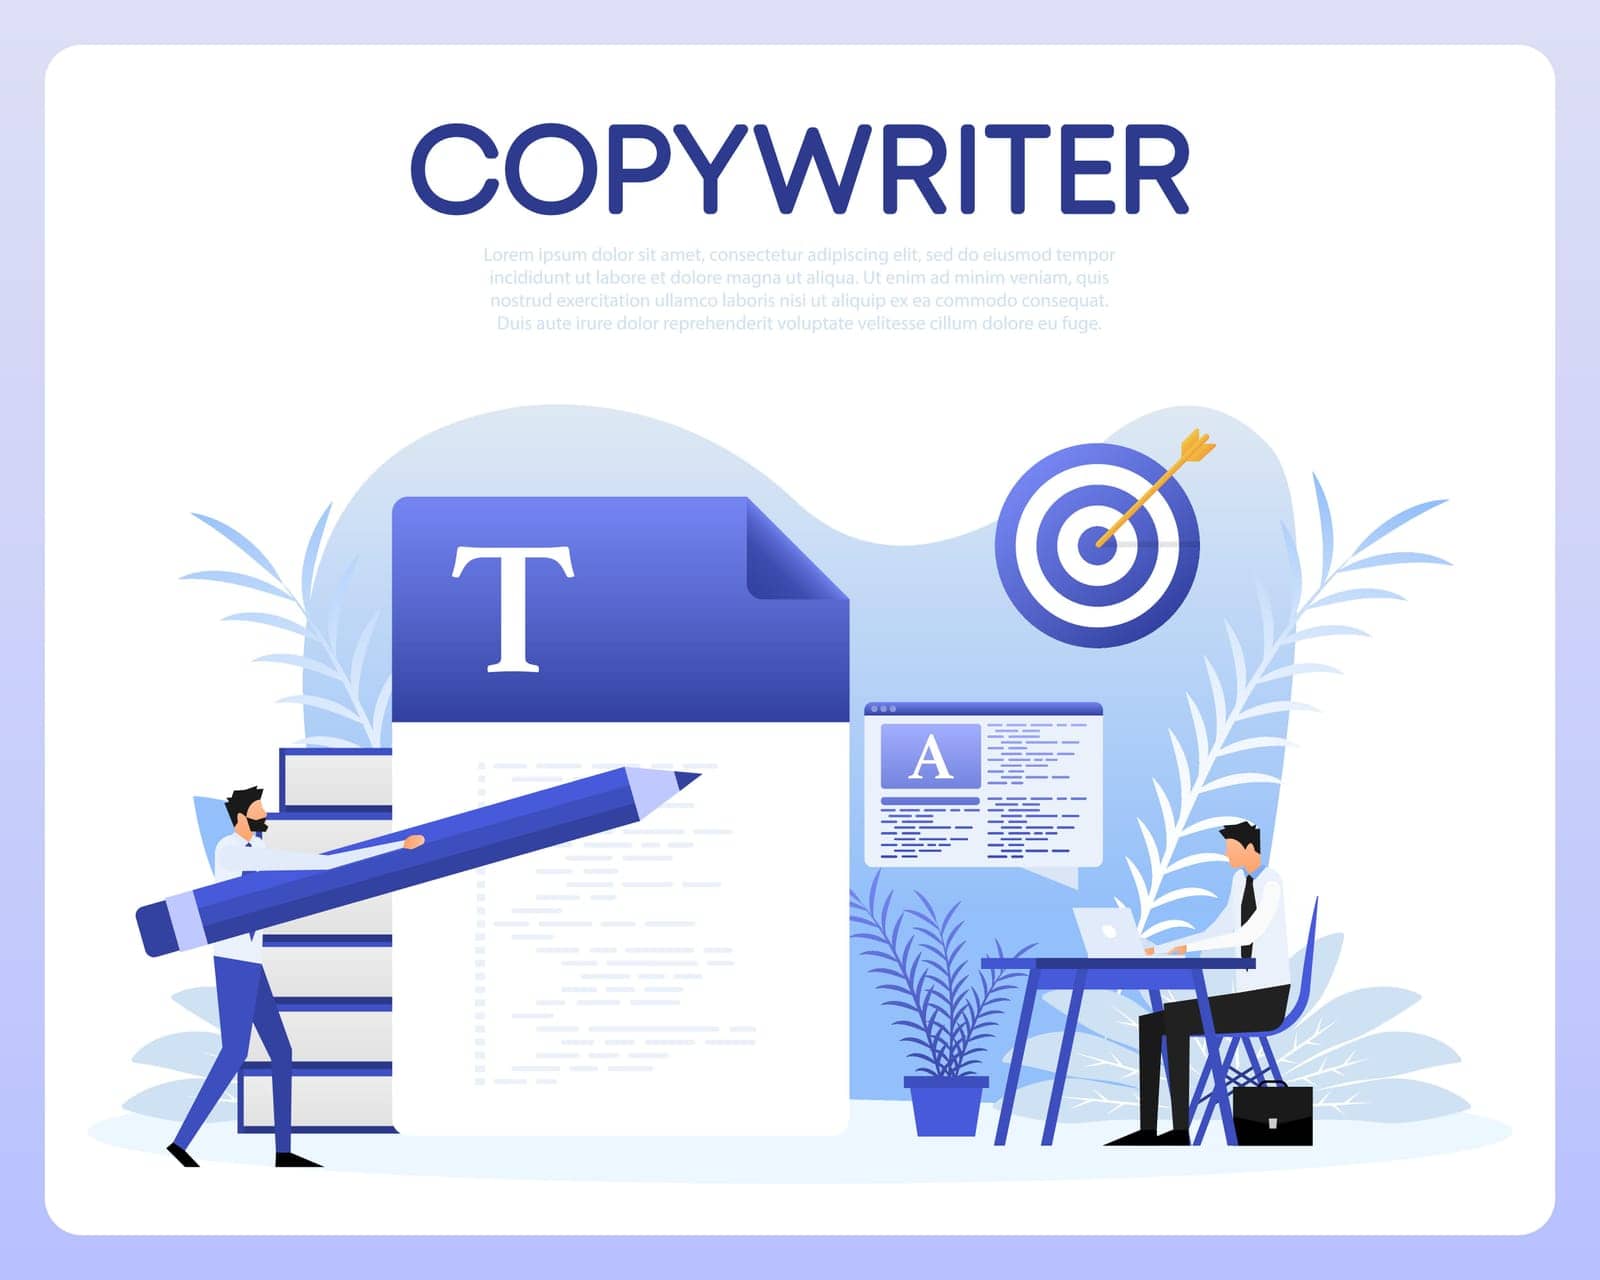 Copywriting, writing icon. Making valuable content and working as a freelancer.